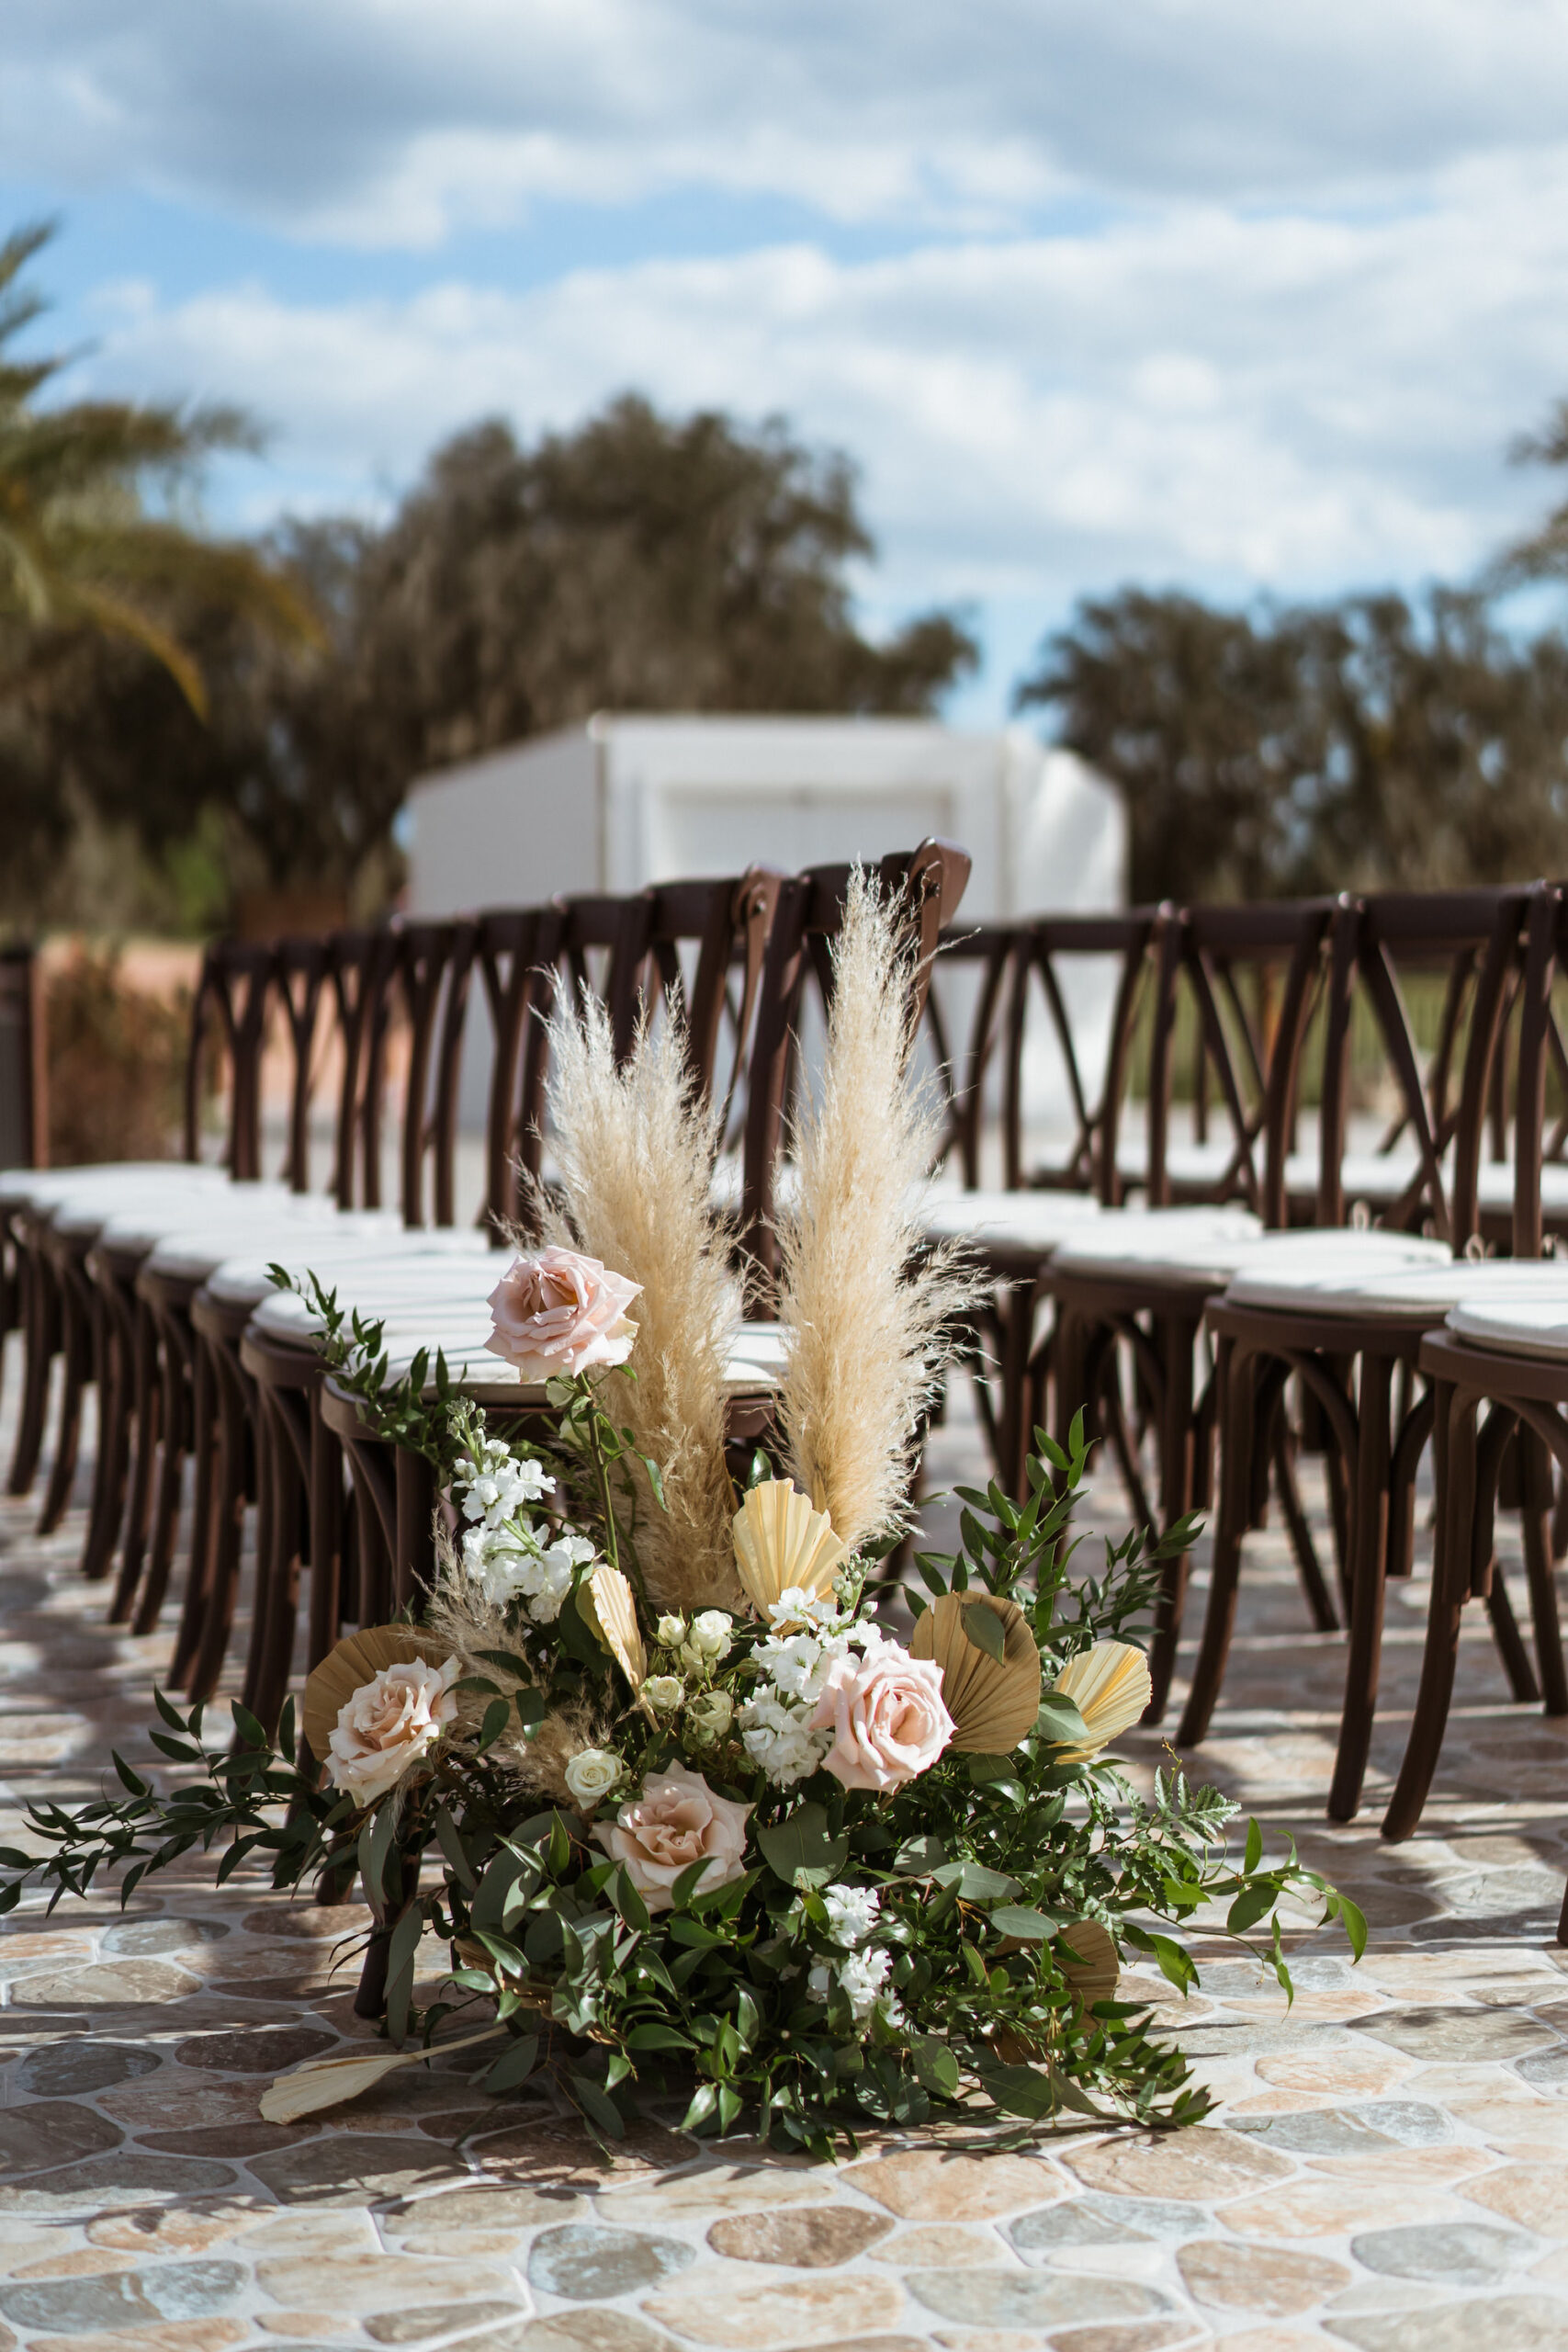 Pink Boho Wedding Ceremony Aisle Decor Inspiration | Pampas Grass, Dried Palm Leaves, Roses, and Greenery Floral Arrangements